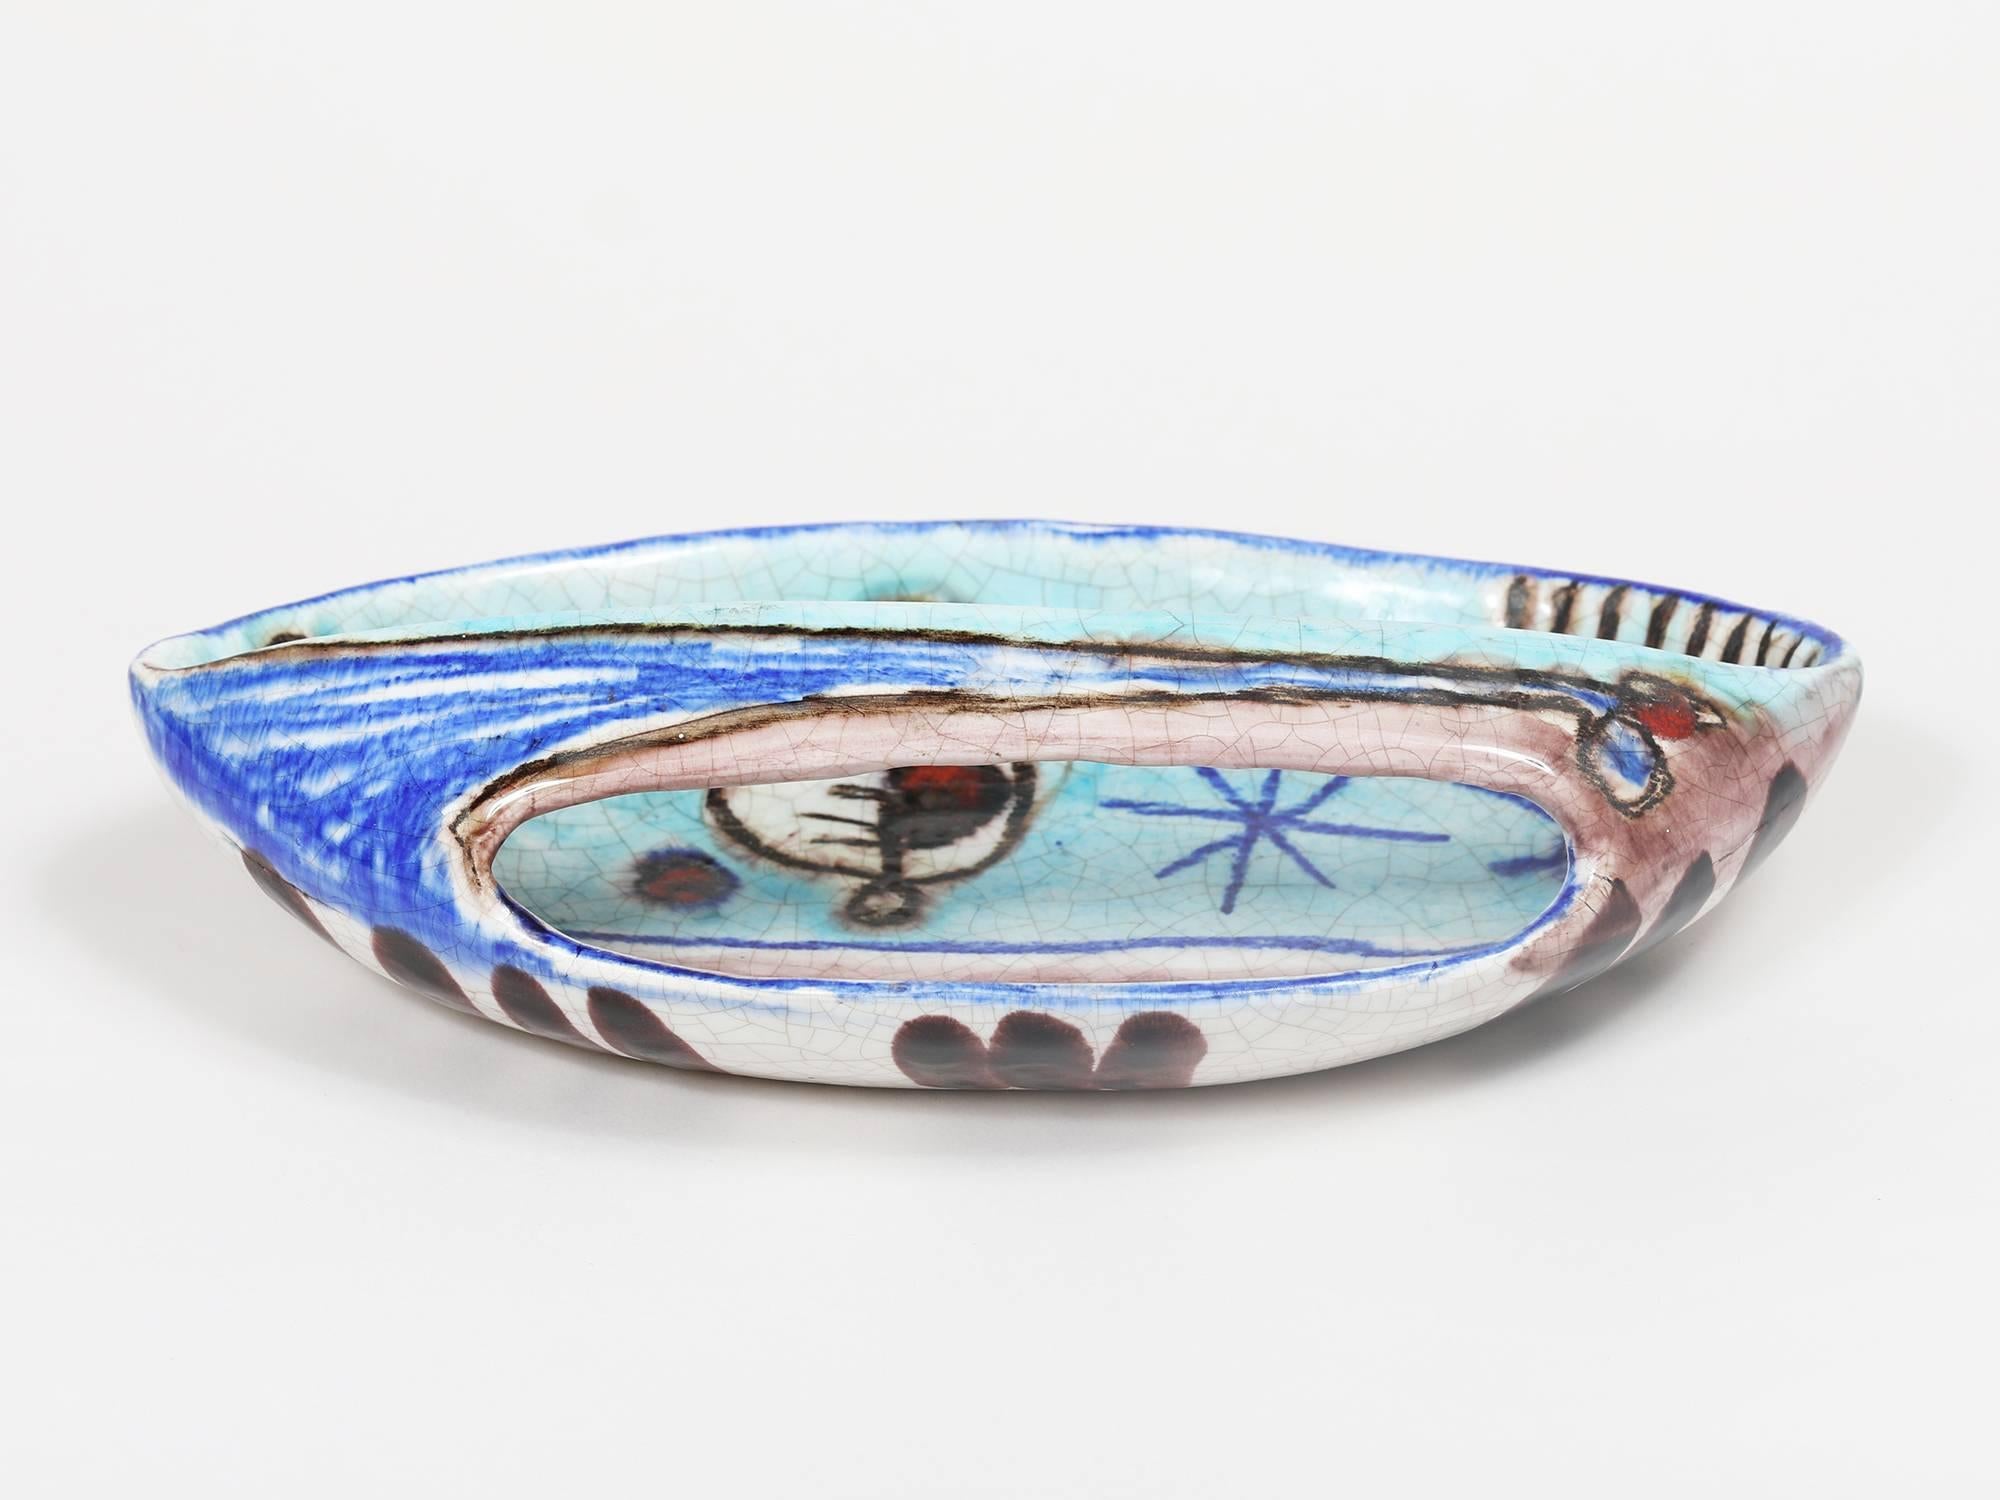 A rare, abstractly decorated ceramic dish with a handle by Italian post-war master ceramicist Marcello Fantoni. This rare form was purchased directly from Mr. Fantoni at his studio in Florence.